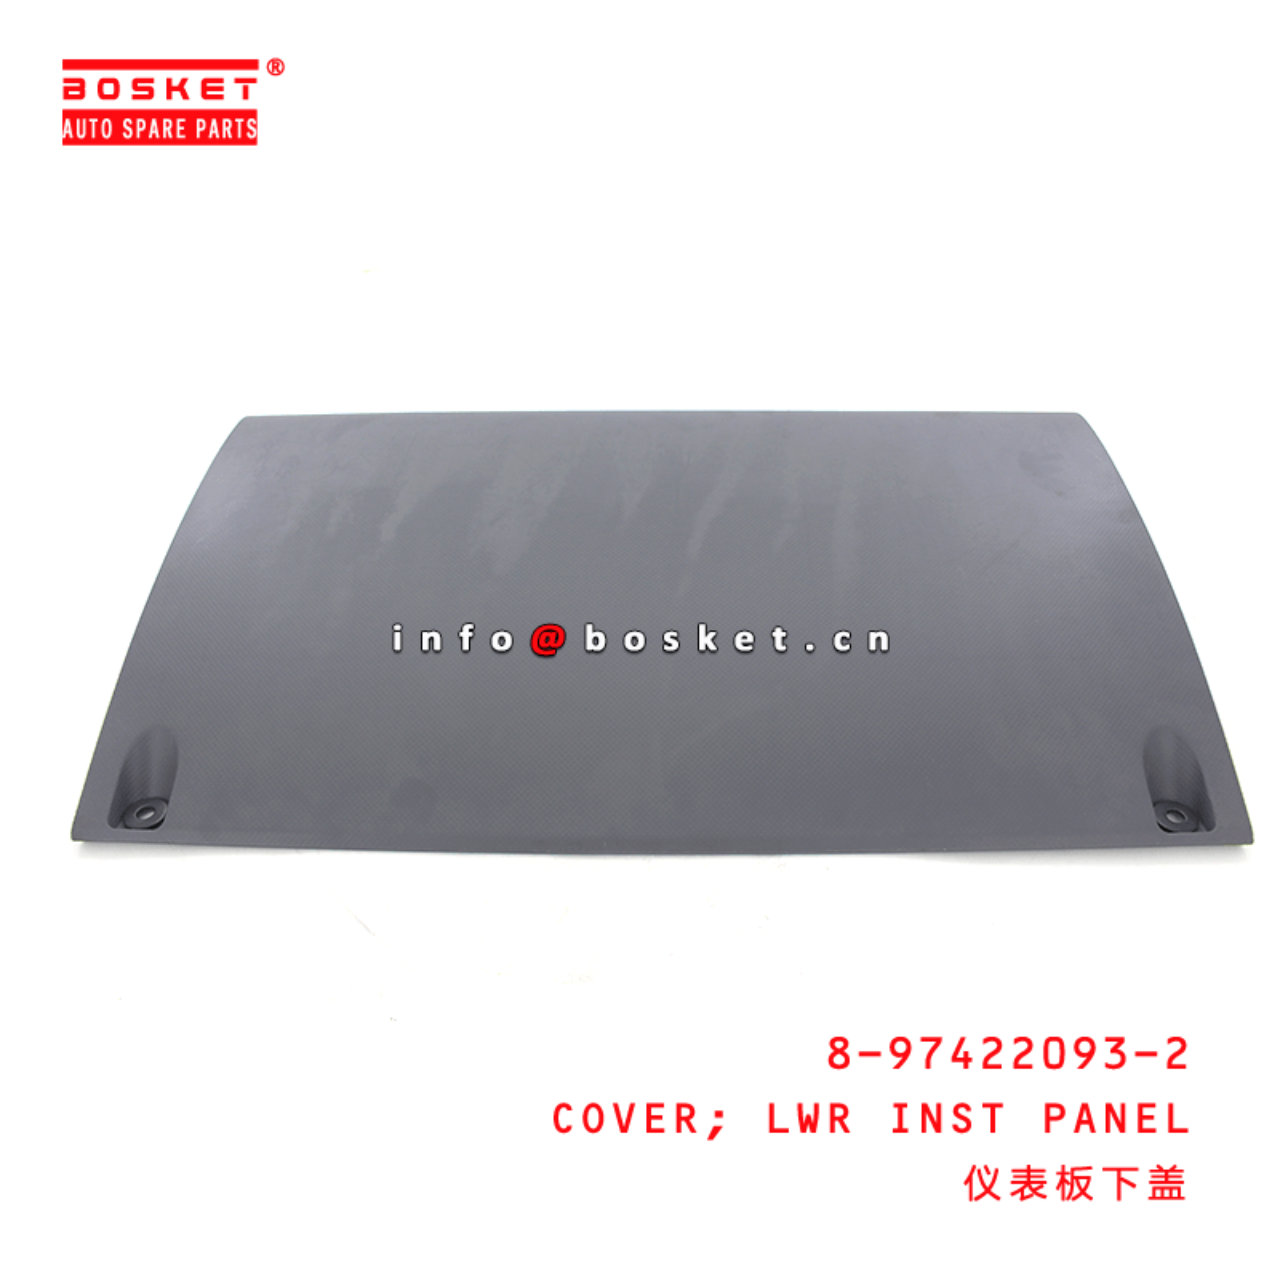  8-97422093-2 Lower Inst Panel Cover 8974220932 Suitable for ISUZU VC46